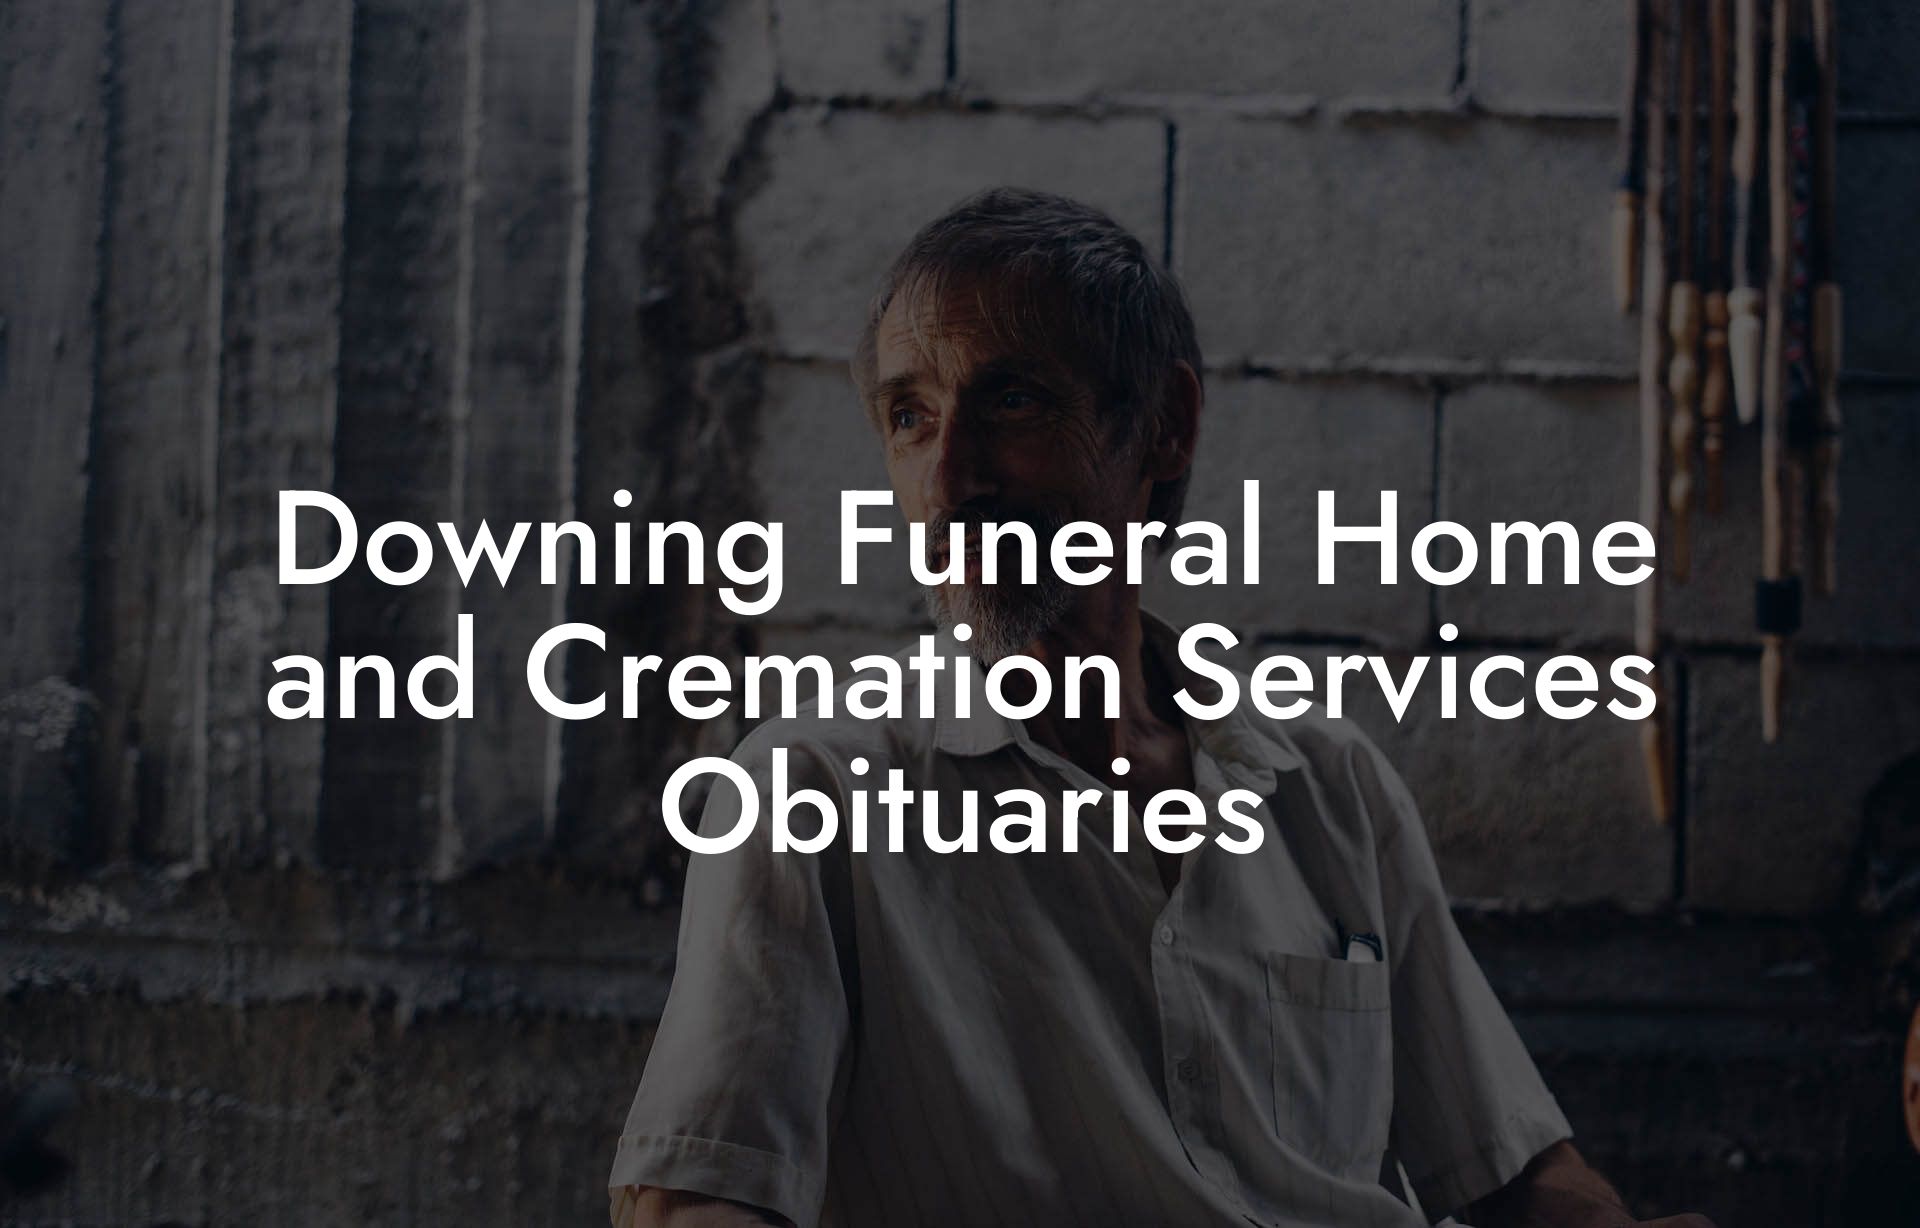 Downing Funeral Home and Cremation Services Obituaries